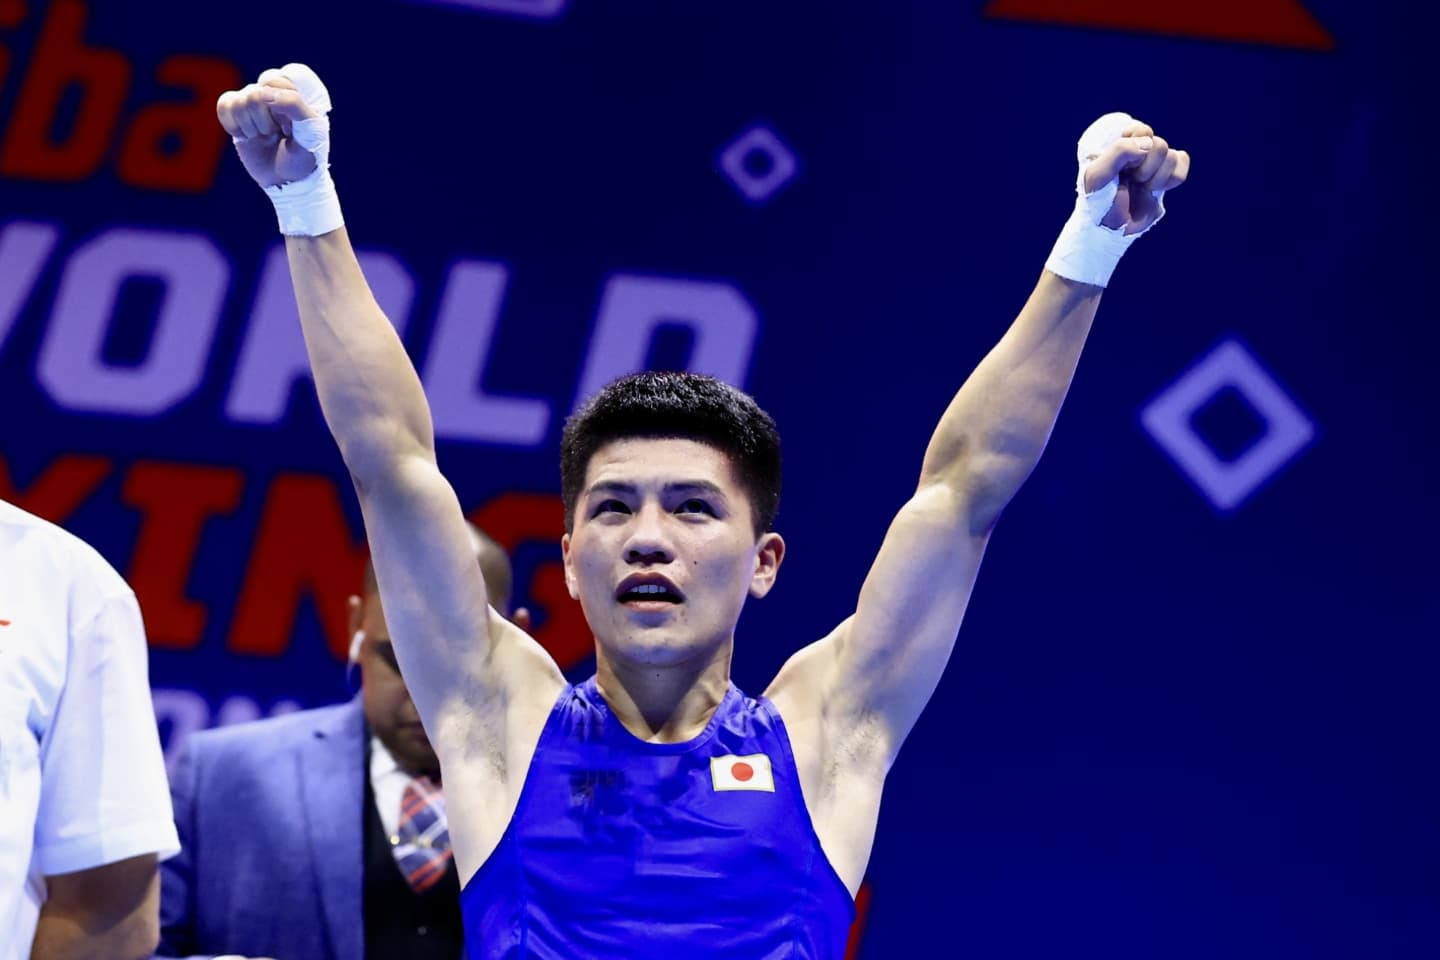 Japan's Tomoya Tsuboi was one of the winners today at the Asian Boxing Championships ©IBA